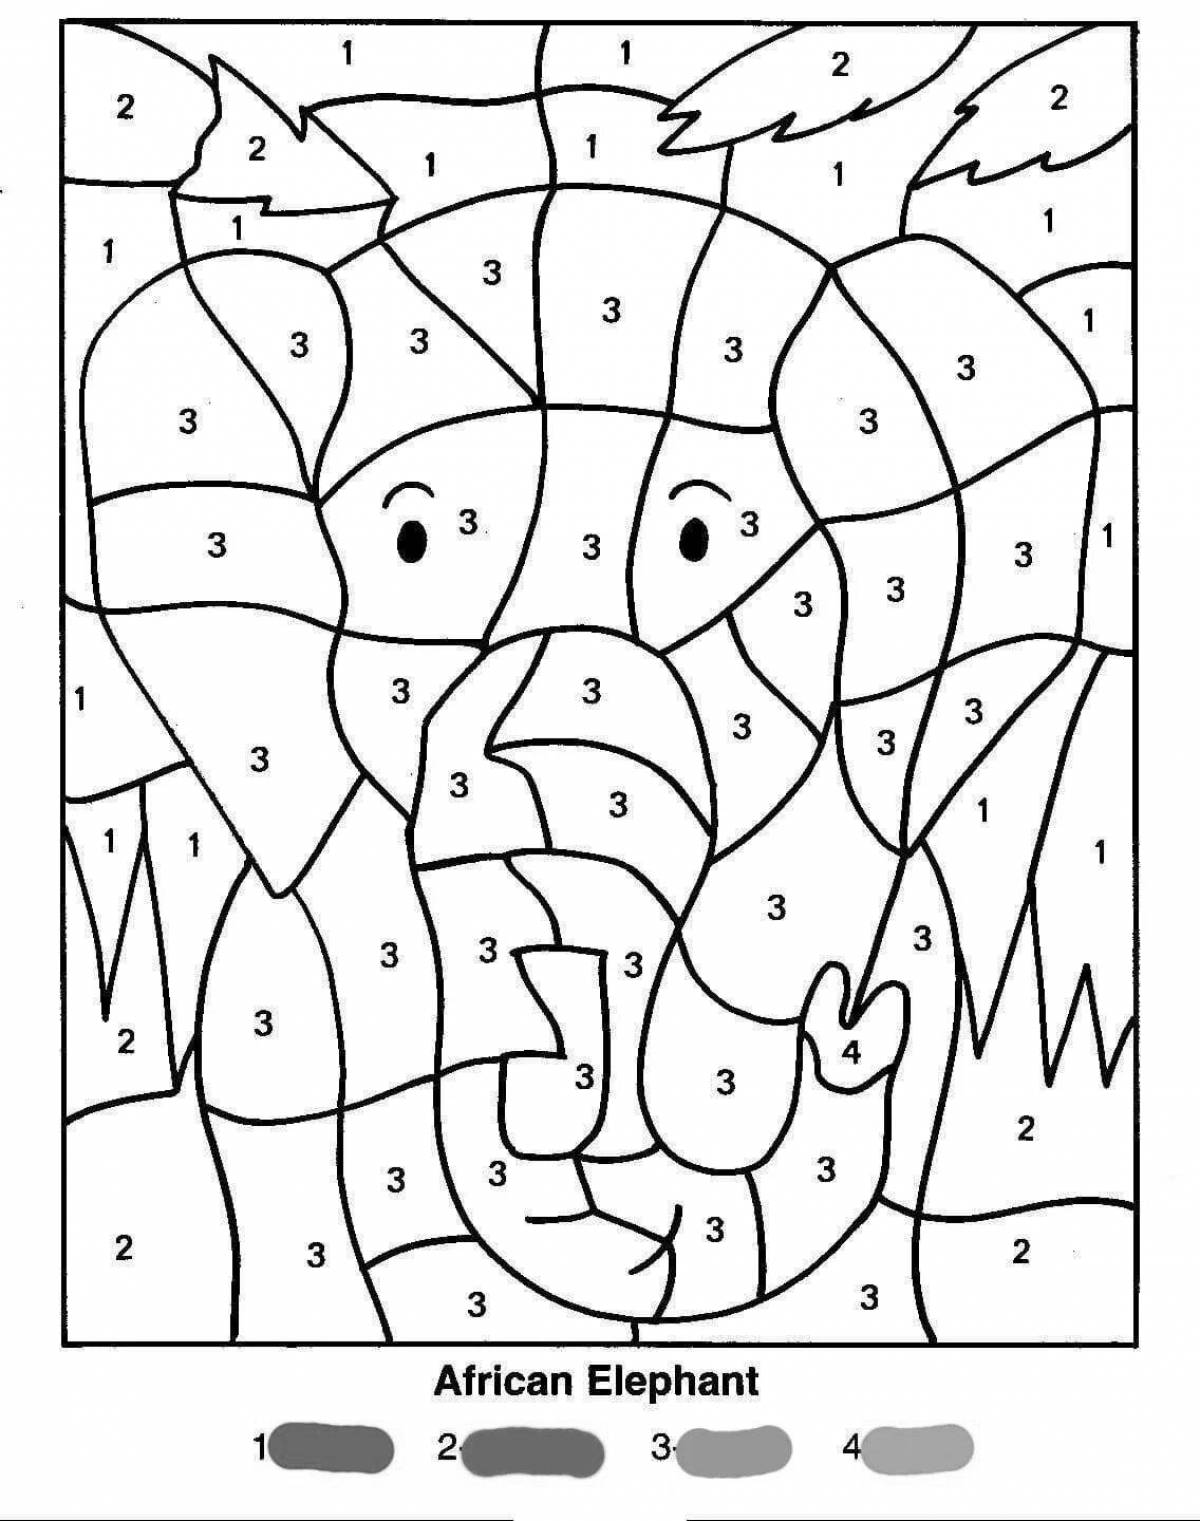 Fun coloring by numbers for children up to 10 years old